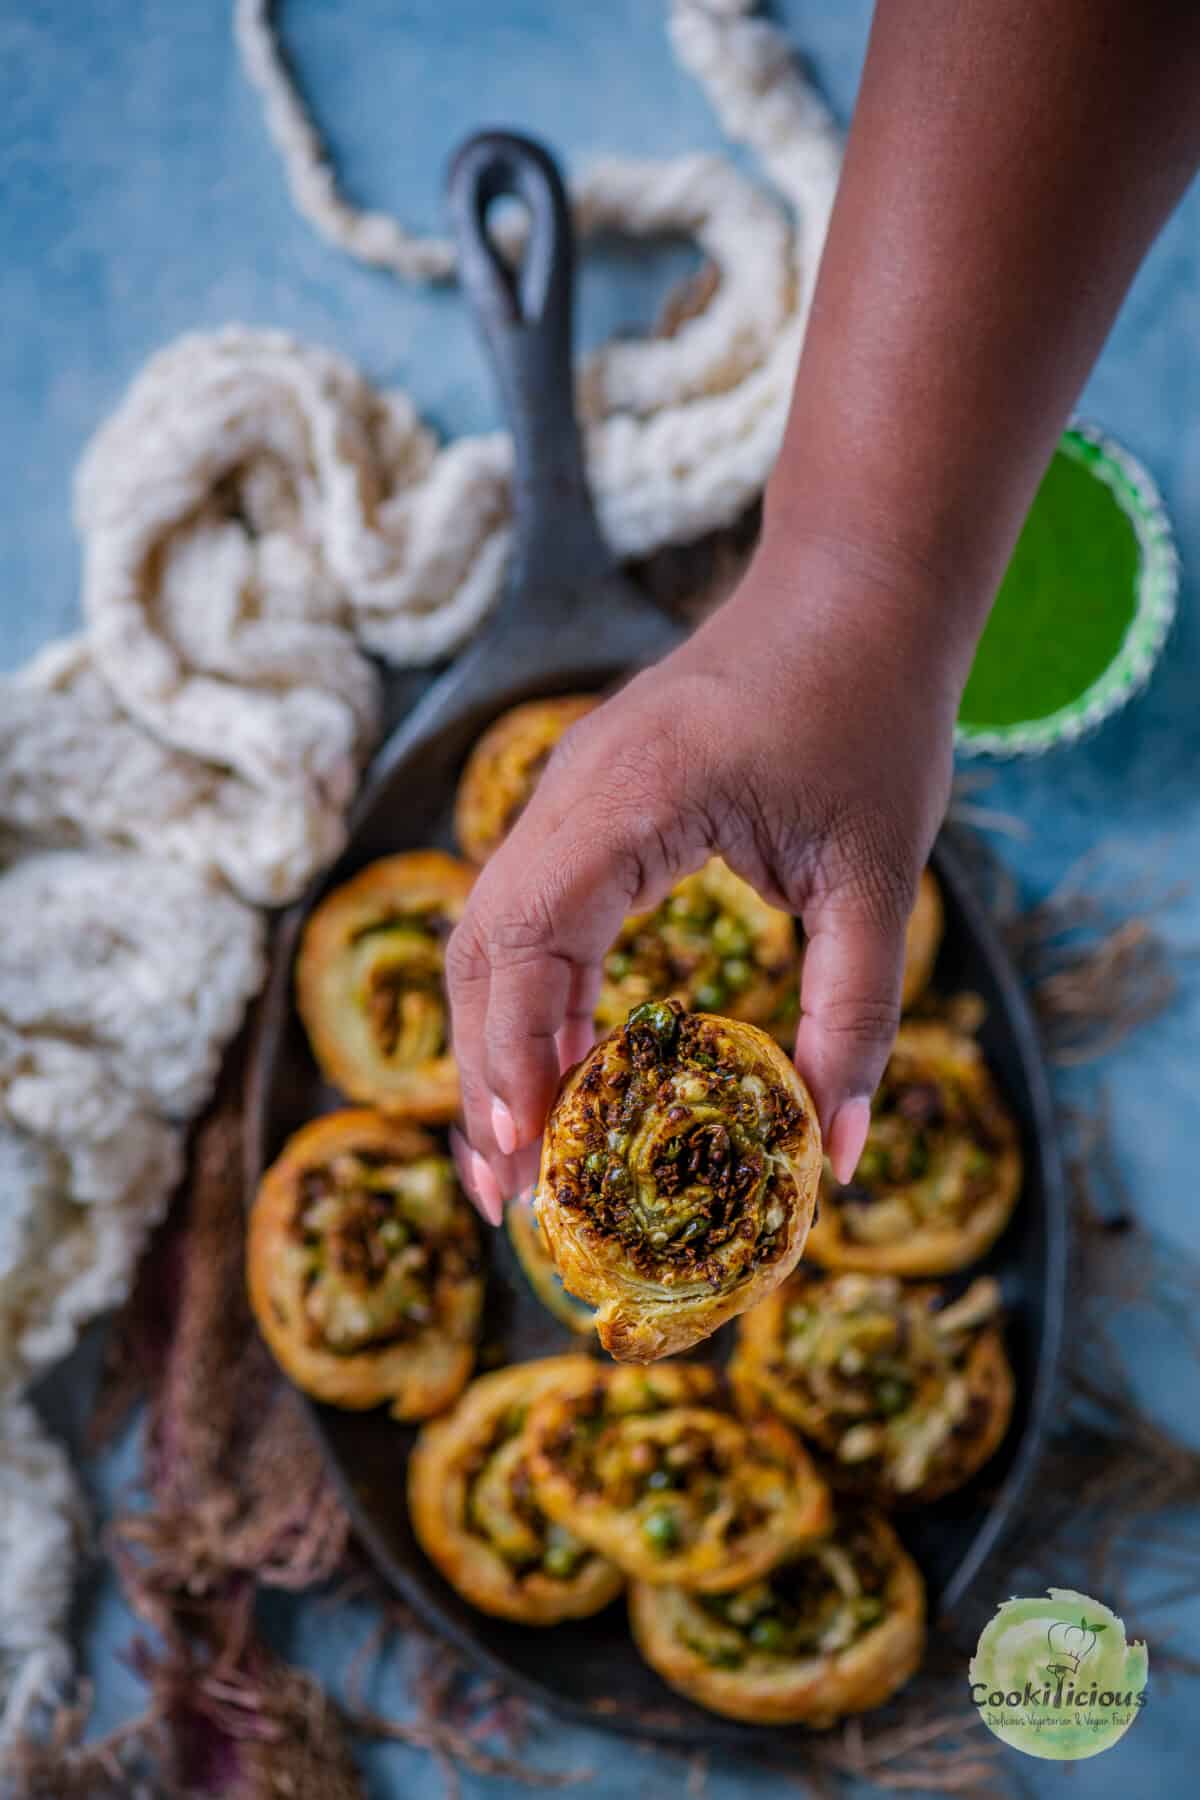 A hand picking up one Puff Pastry Pinwheel With Matar Kachori Filling from a tray.